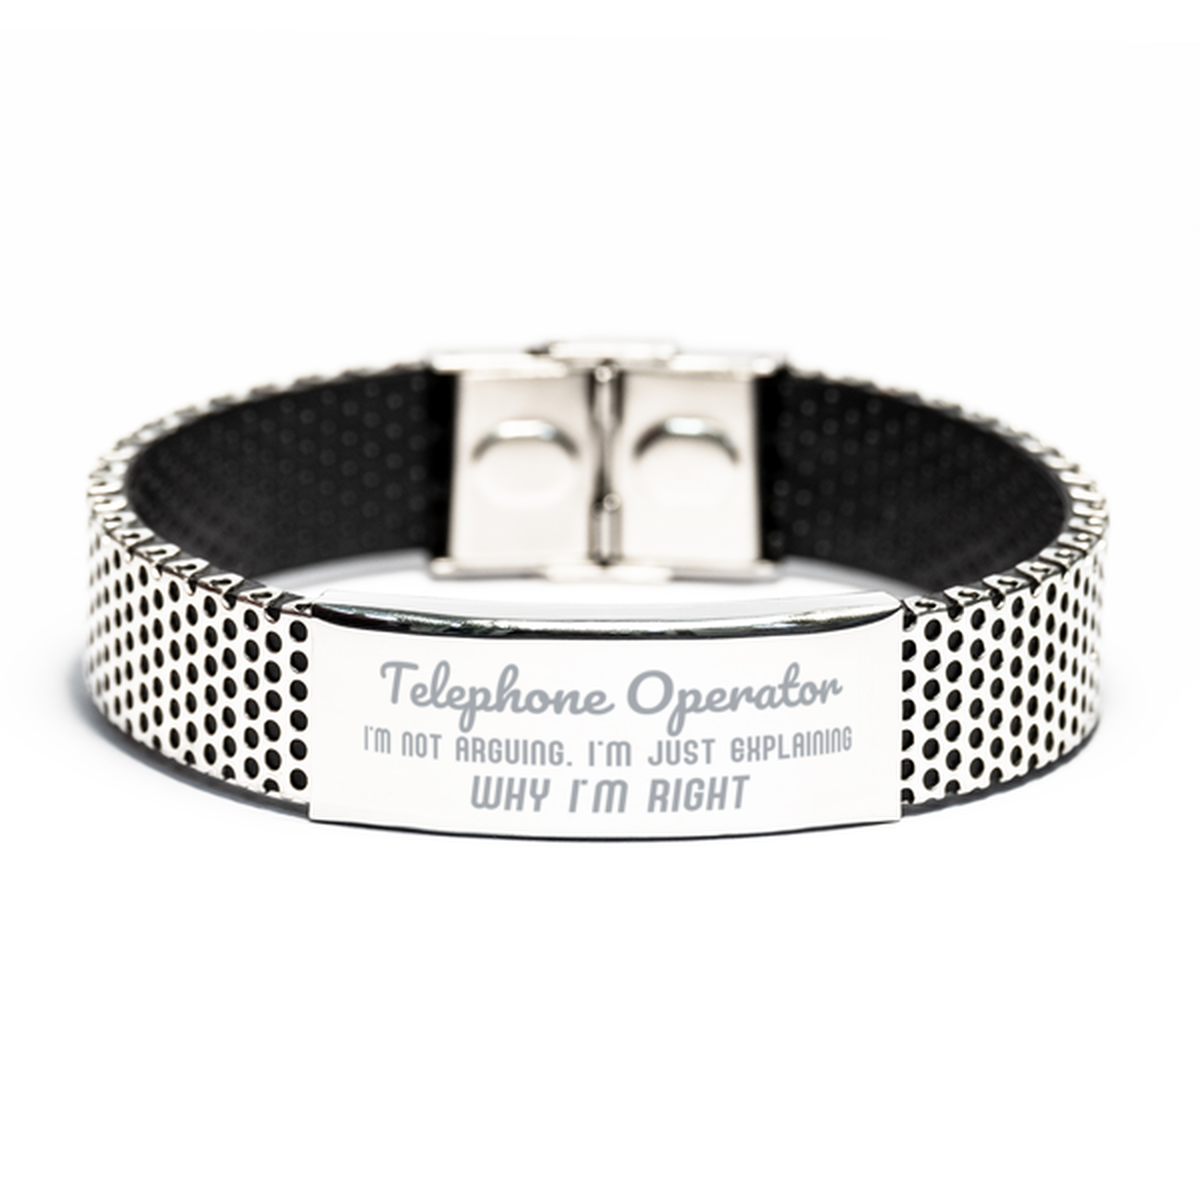 Telephone Operator I'm not Arguing. I'm Just Explaining Why I'm RIGHT Stainless Steel Bracelet, Funny Saying Quote Telephone Operator Gifts For Telephone Operator Graduation Birthday Christmas Gifts for Men Women Coworker